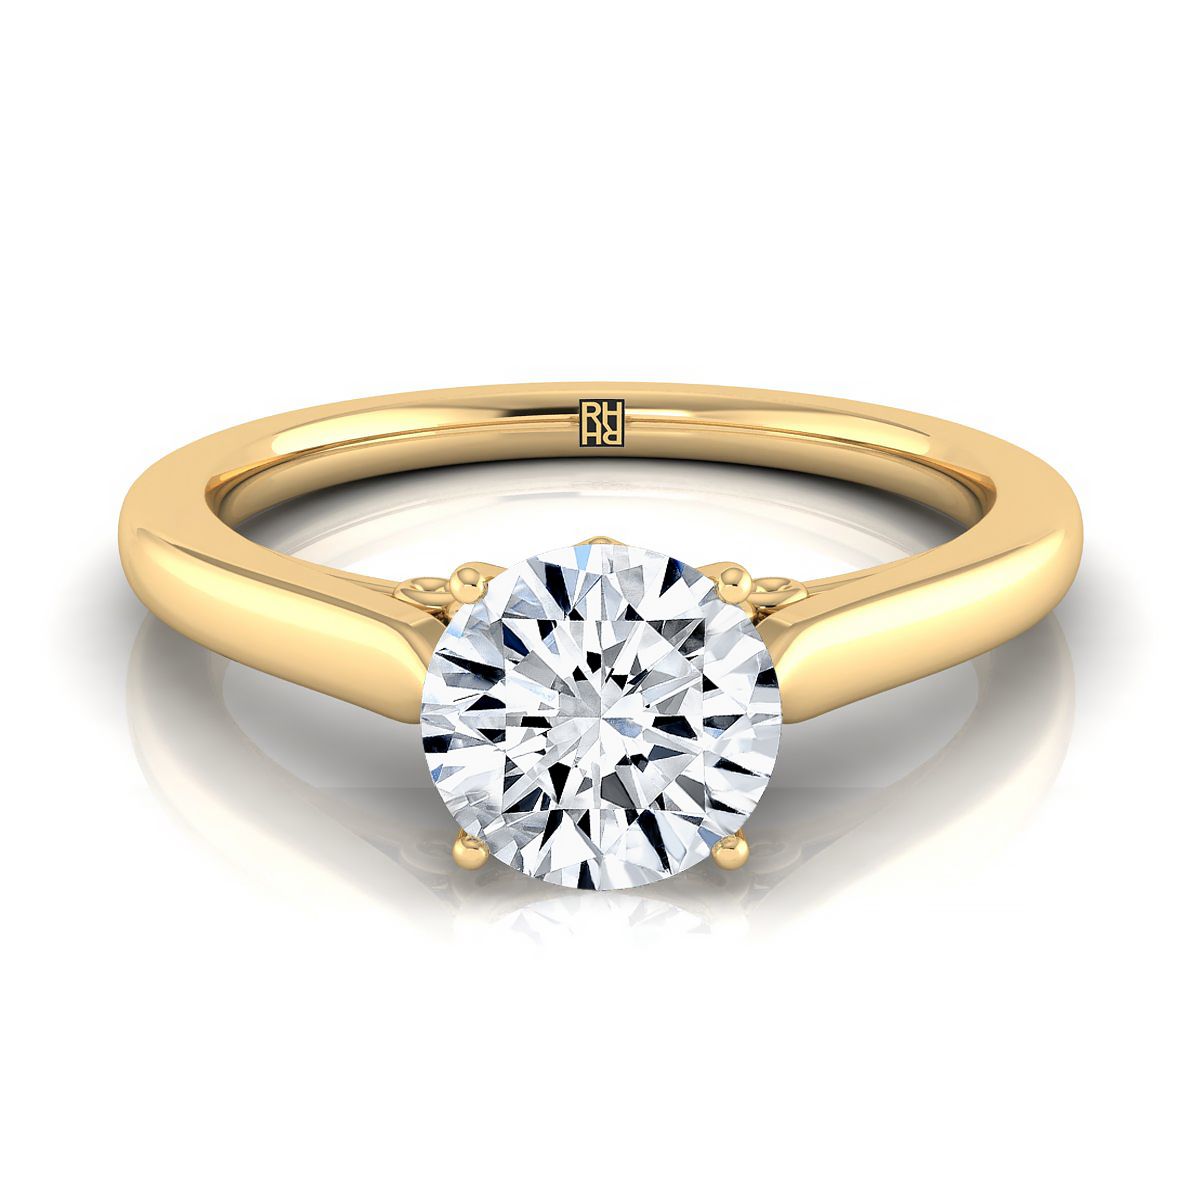 18K Yellow Gold Round Brilliant Scroll Gallery Comfort Fit Solitaire Engagement Ring